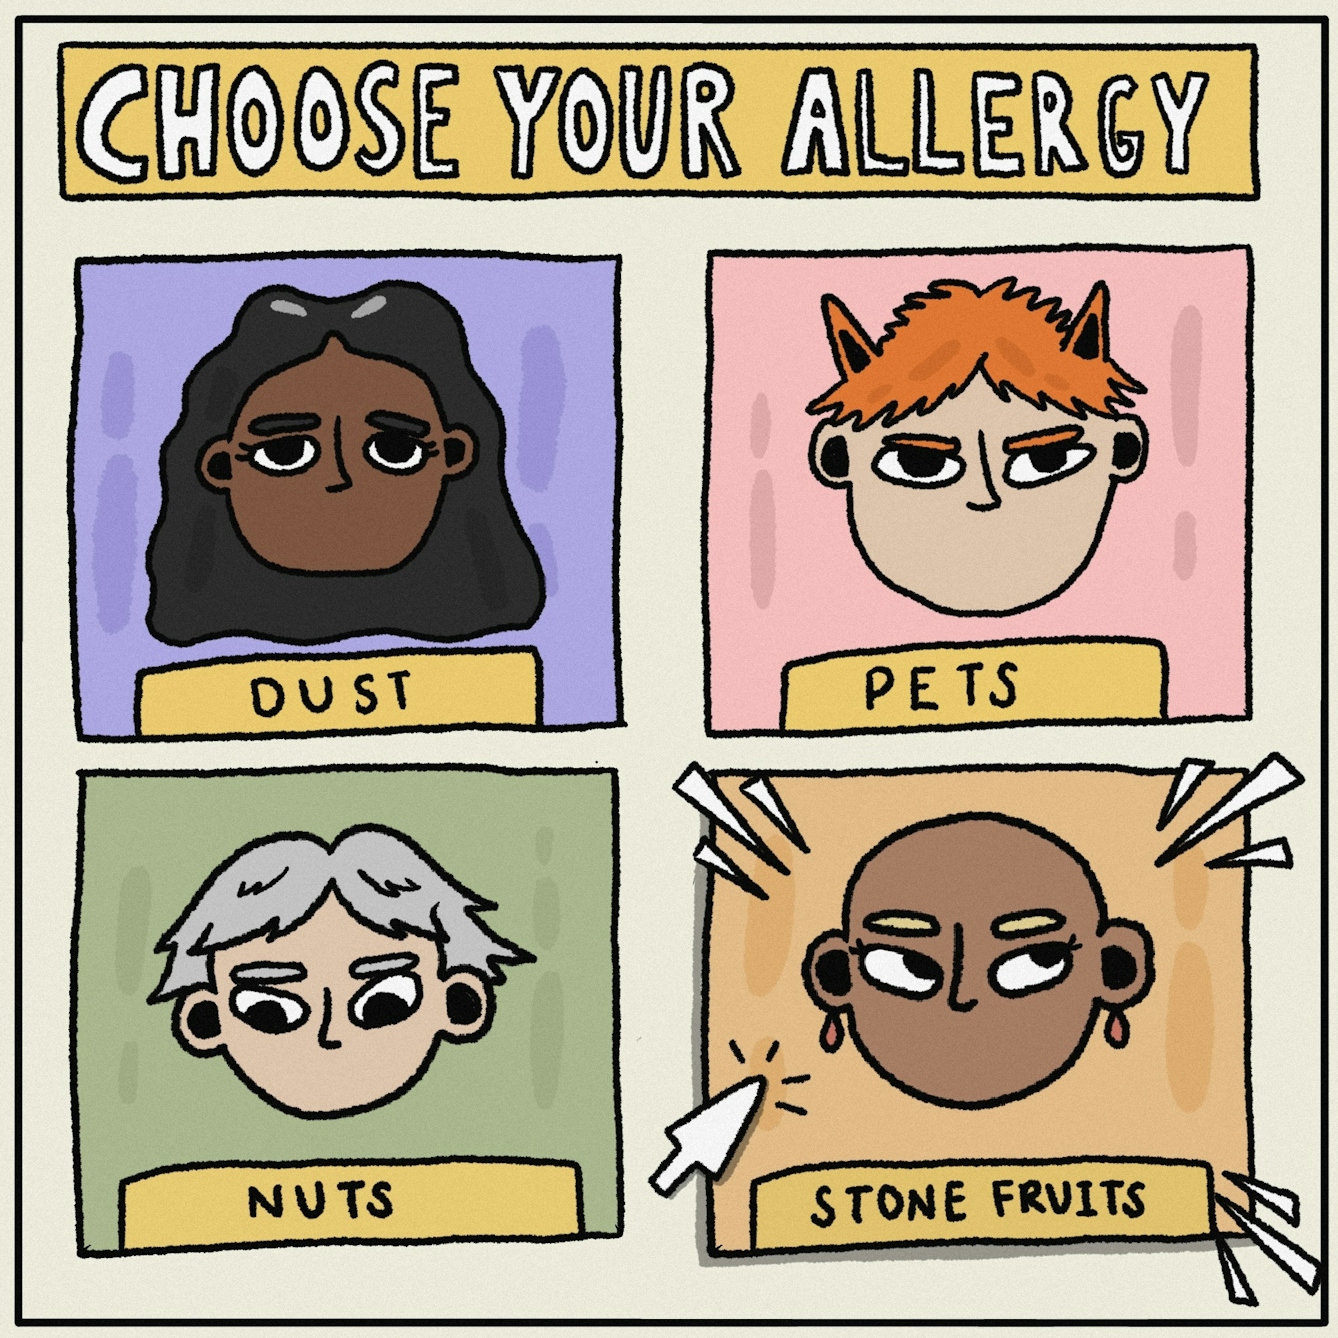 Panel 1 of a digitally drawn, four-panel comic titled ‘Overpowered’. The text at the top reads “CHOOSE YOUR ALLERGY”. The box in the bottom right is labelled ‘STONE FRUITS’ and, in it, is a character with brown skin and blonde eyebrows. A cursor is clicking over this box to signal this is the allergy you have chosen. 